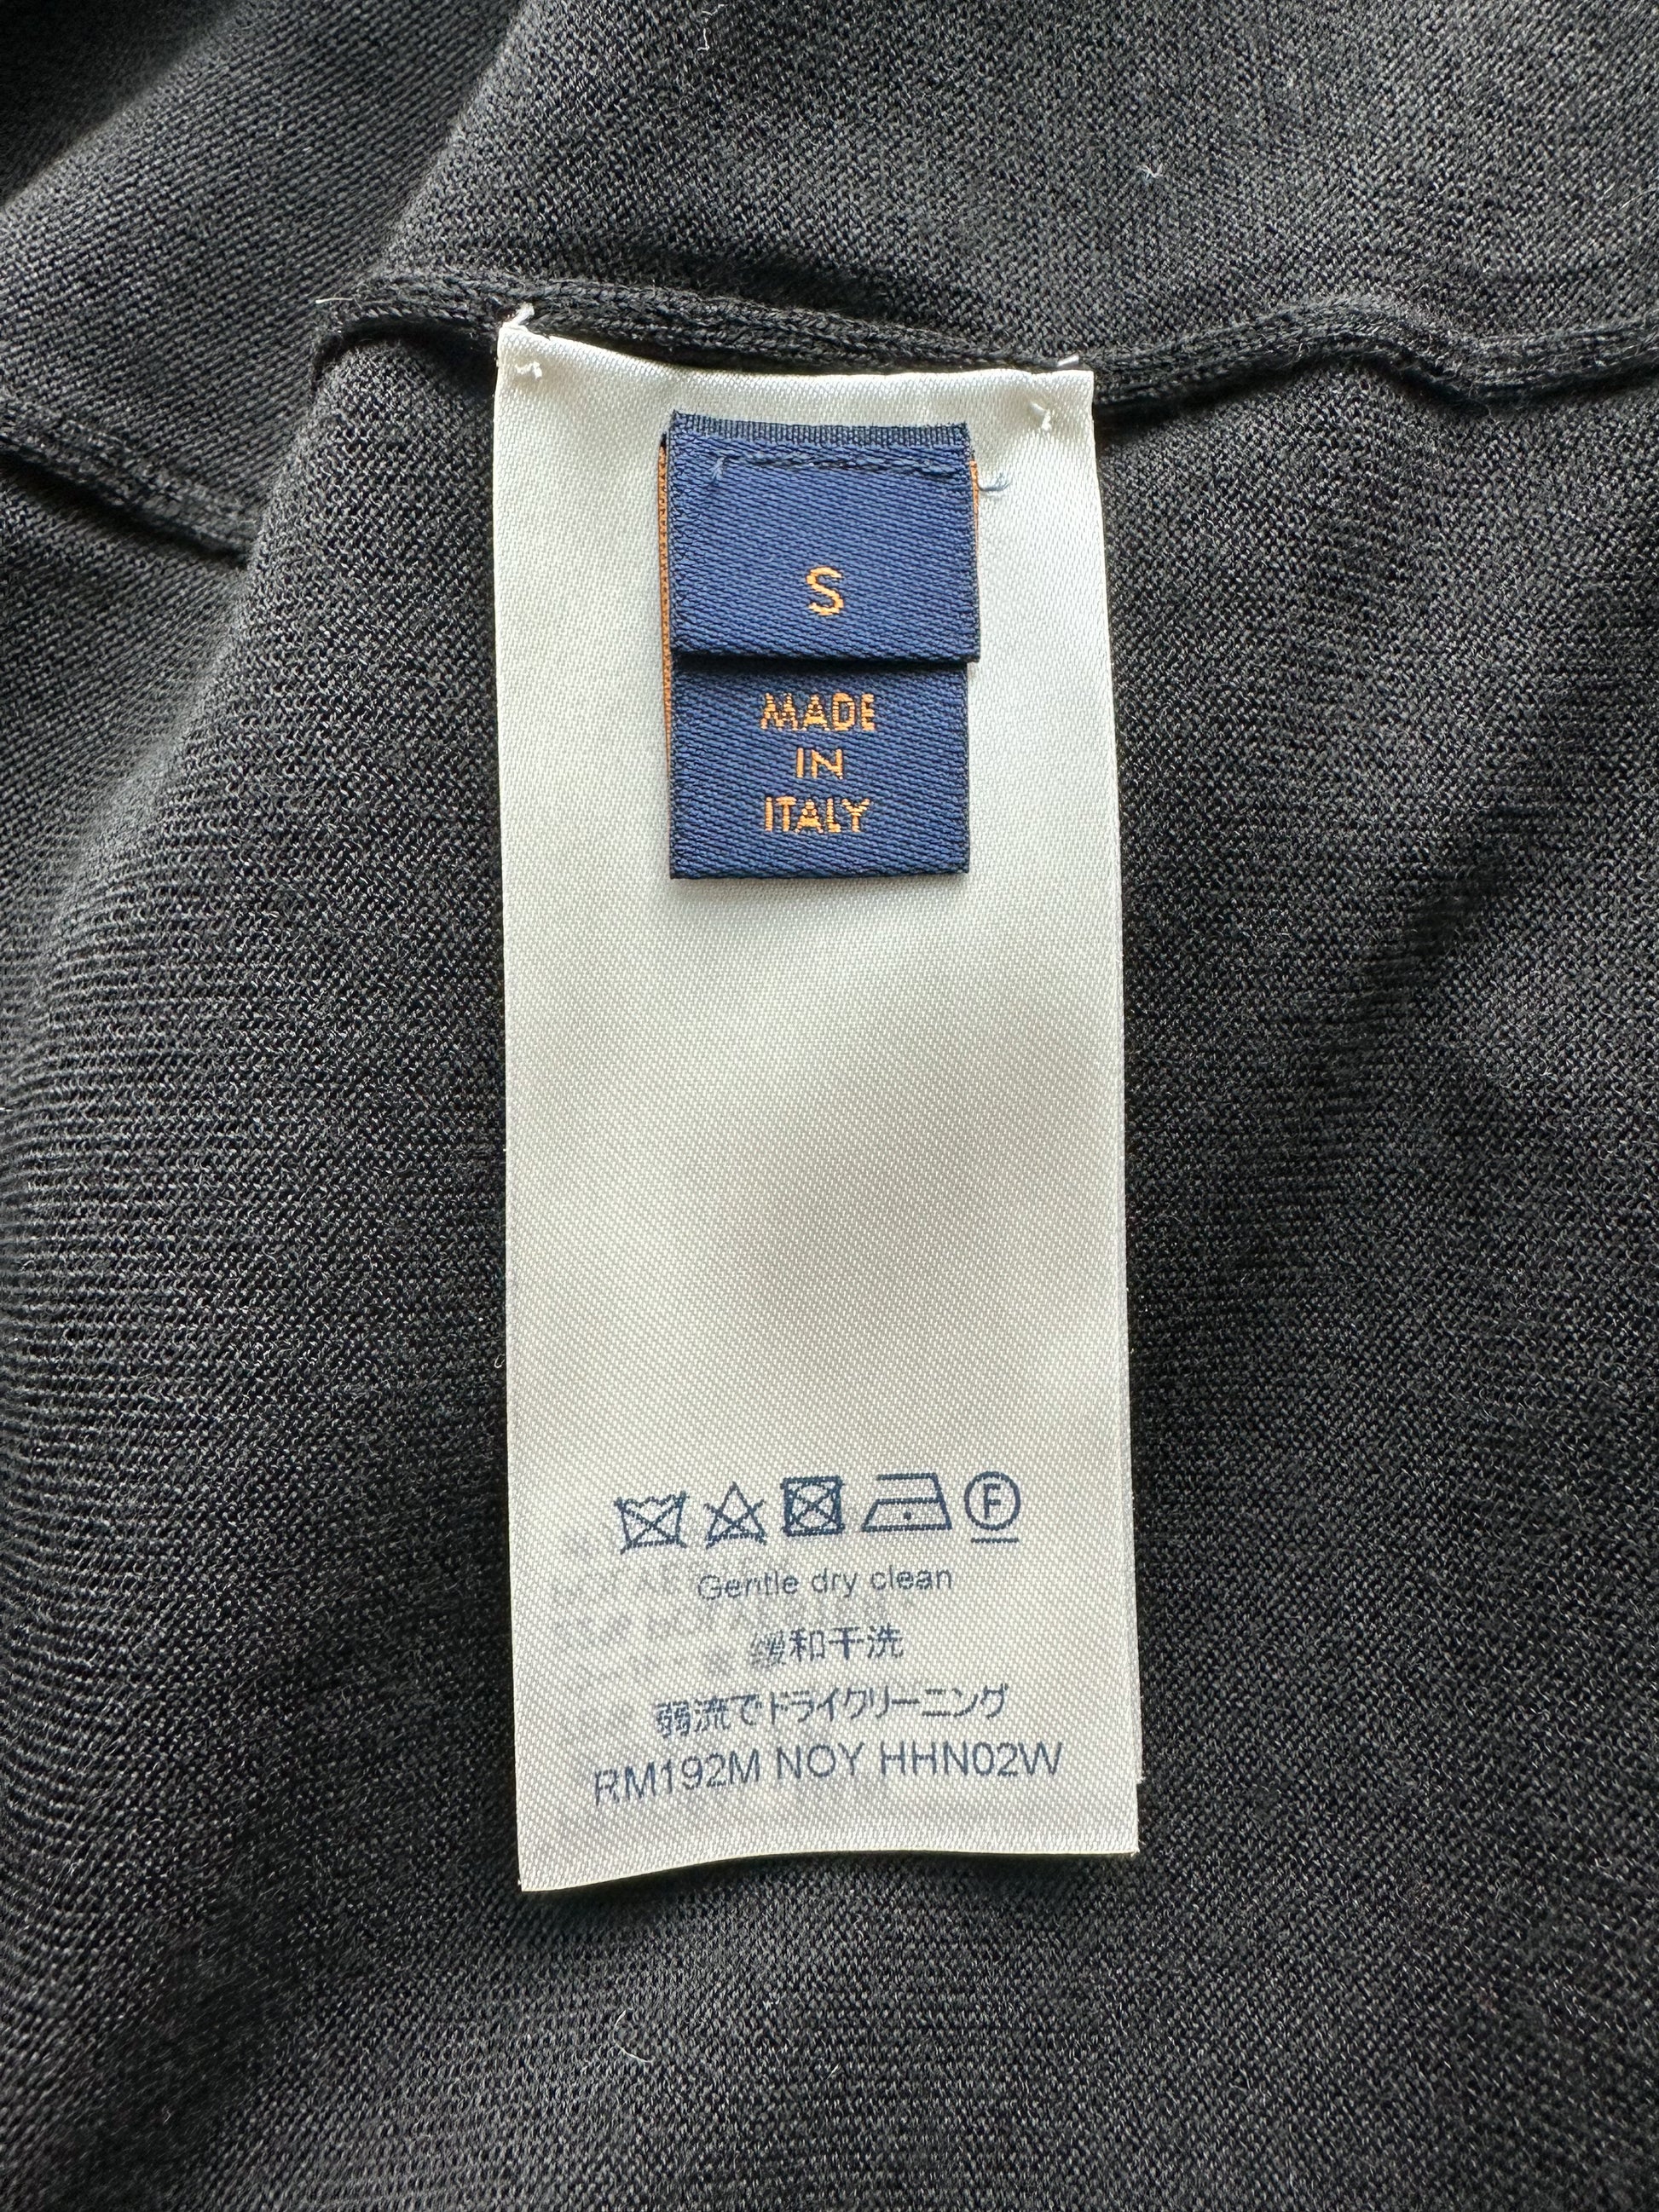 Louis Vuitton Barcode & Earth T-Shirt, XS (Only one